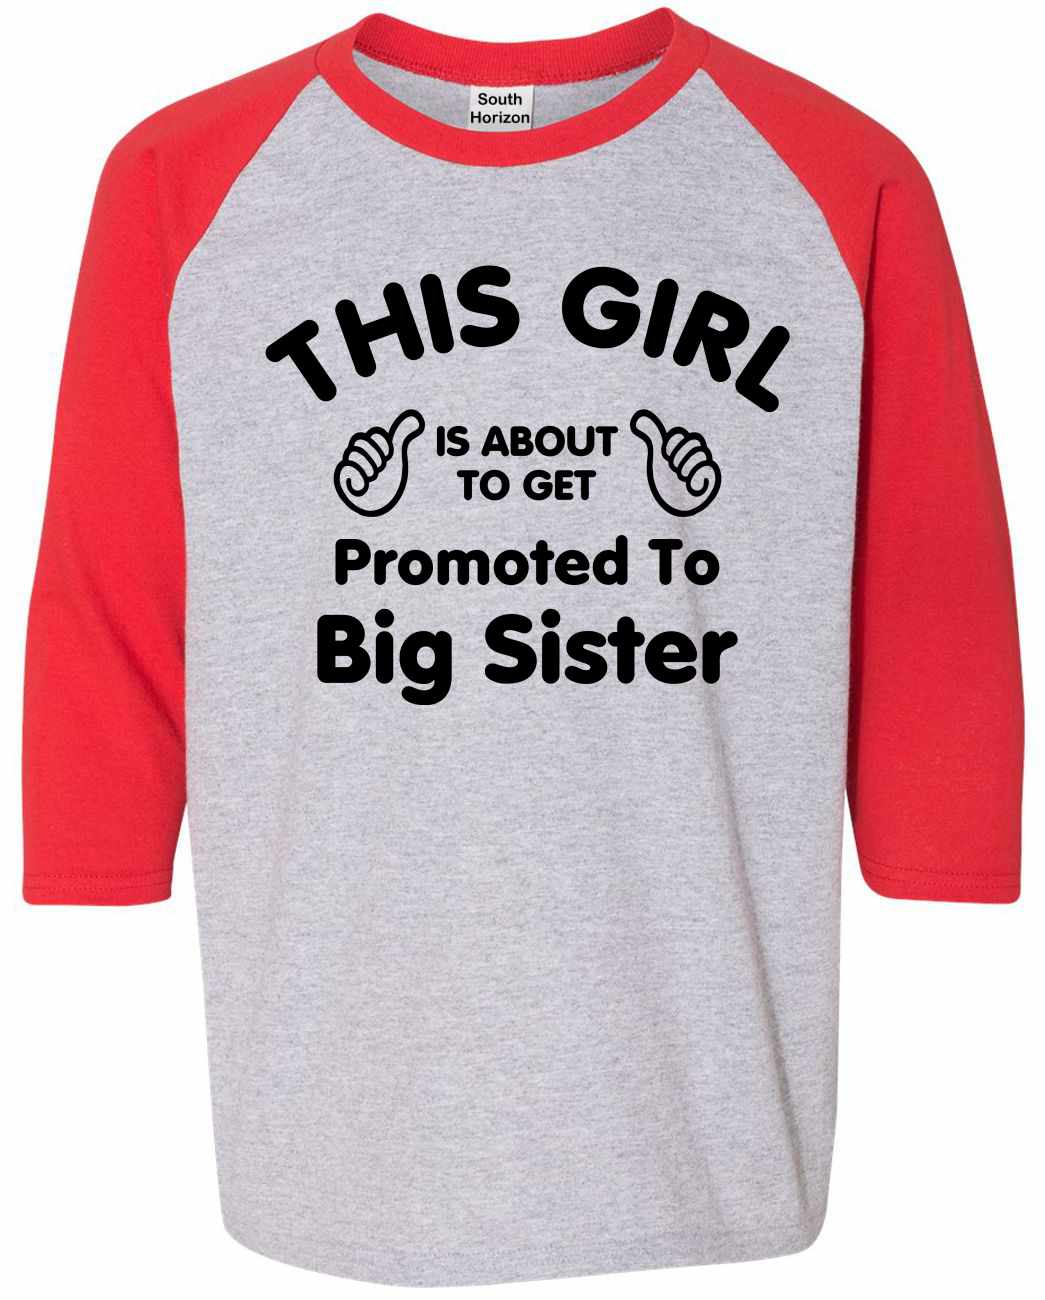 This Girl is About To Get Promoted To Big Sister on Youth Baseball Shirt